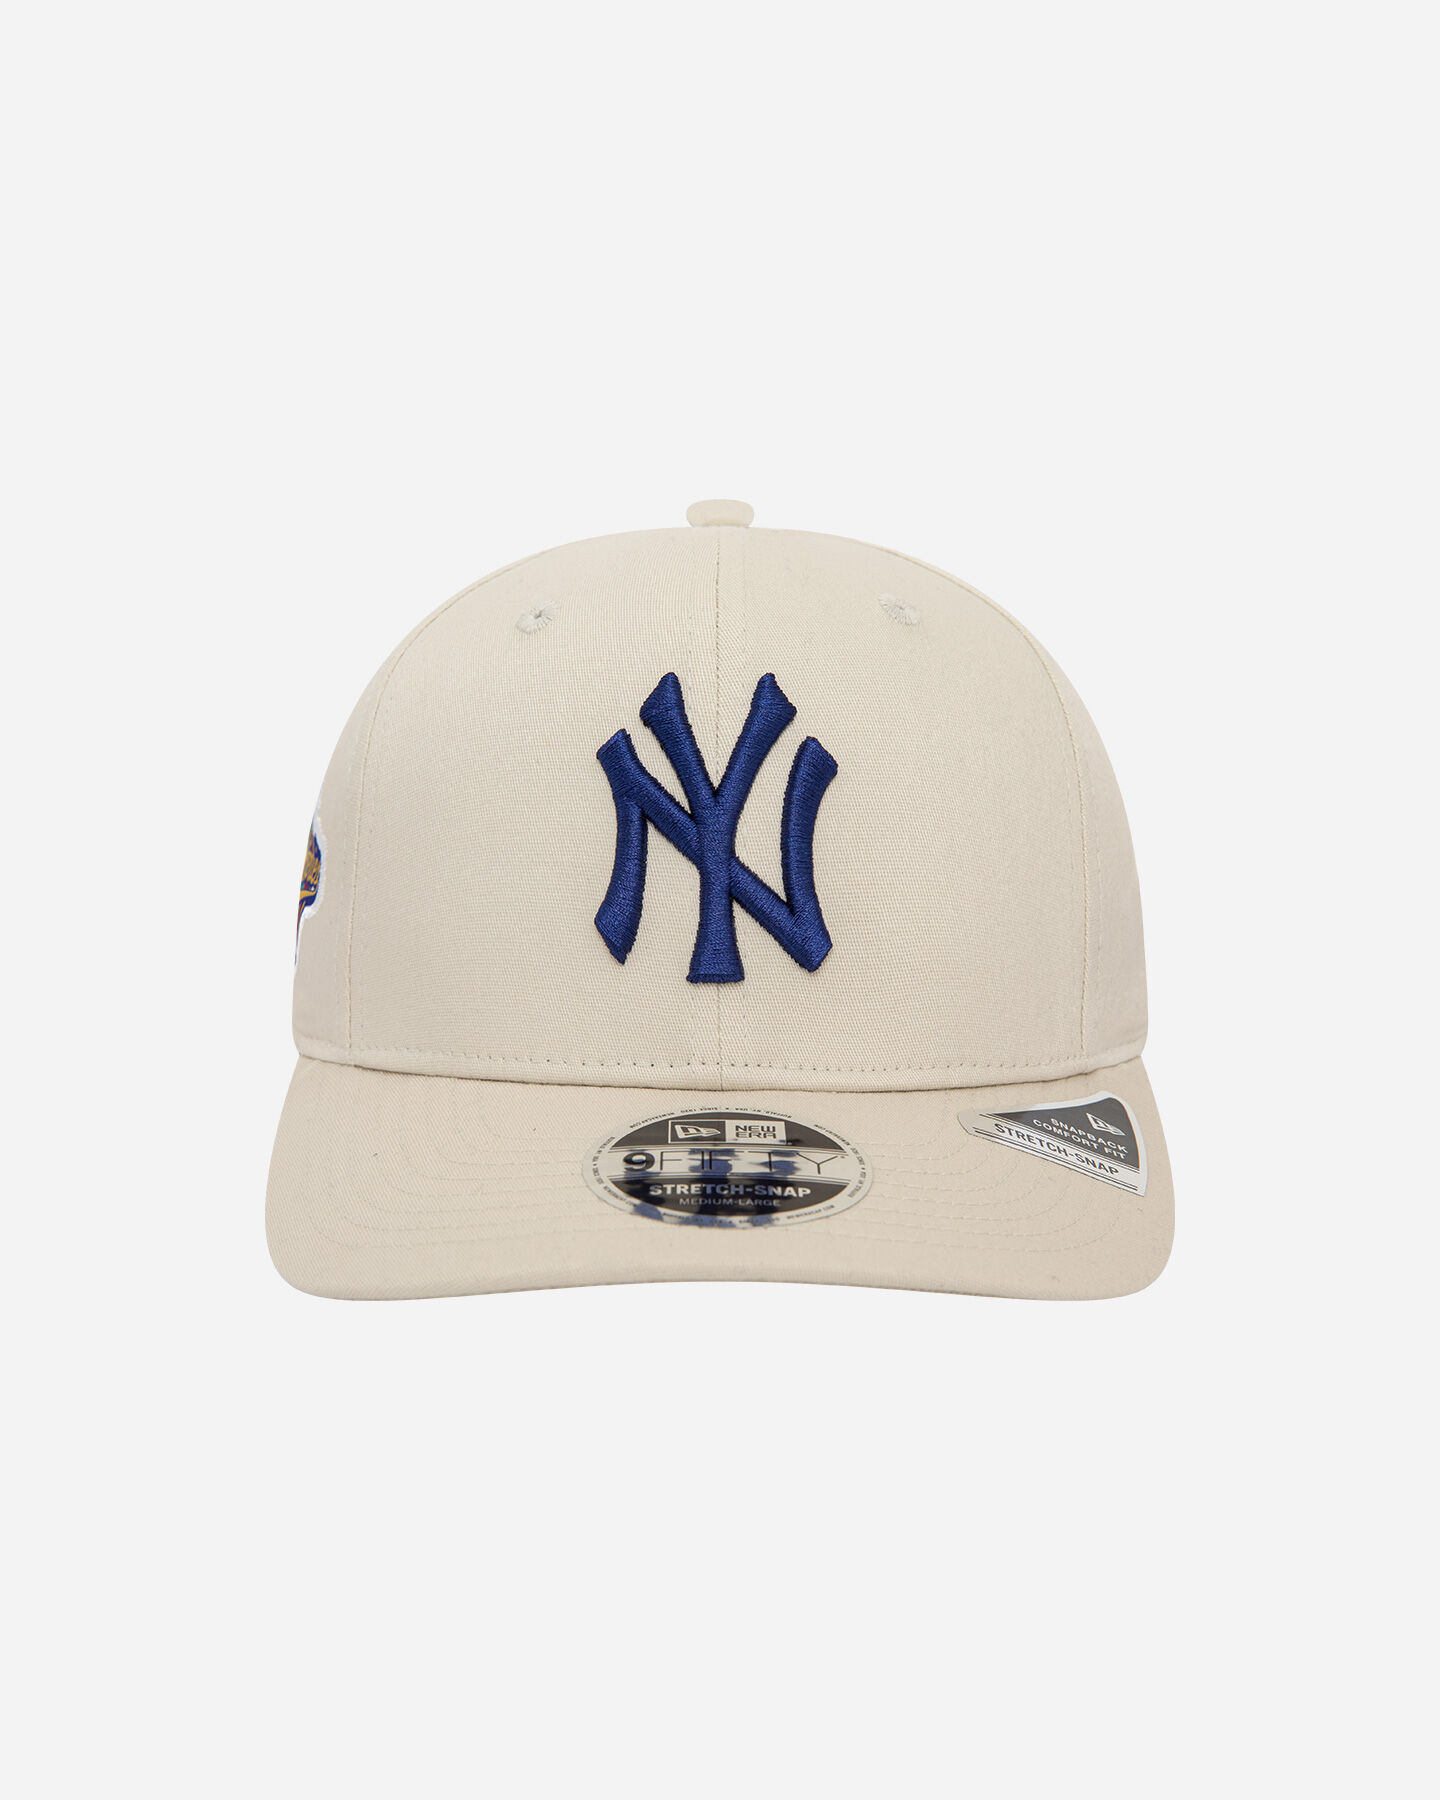  Cappellino NEW ERA 9FIFTY NEW YORK YANKEES M S5670976|270|SM scatto 1